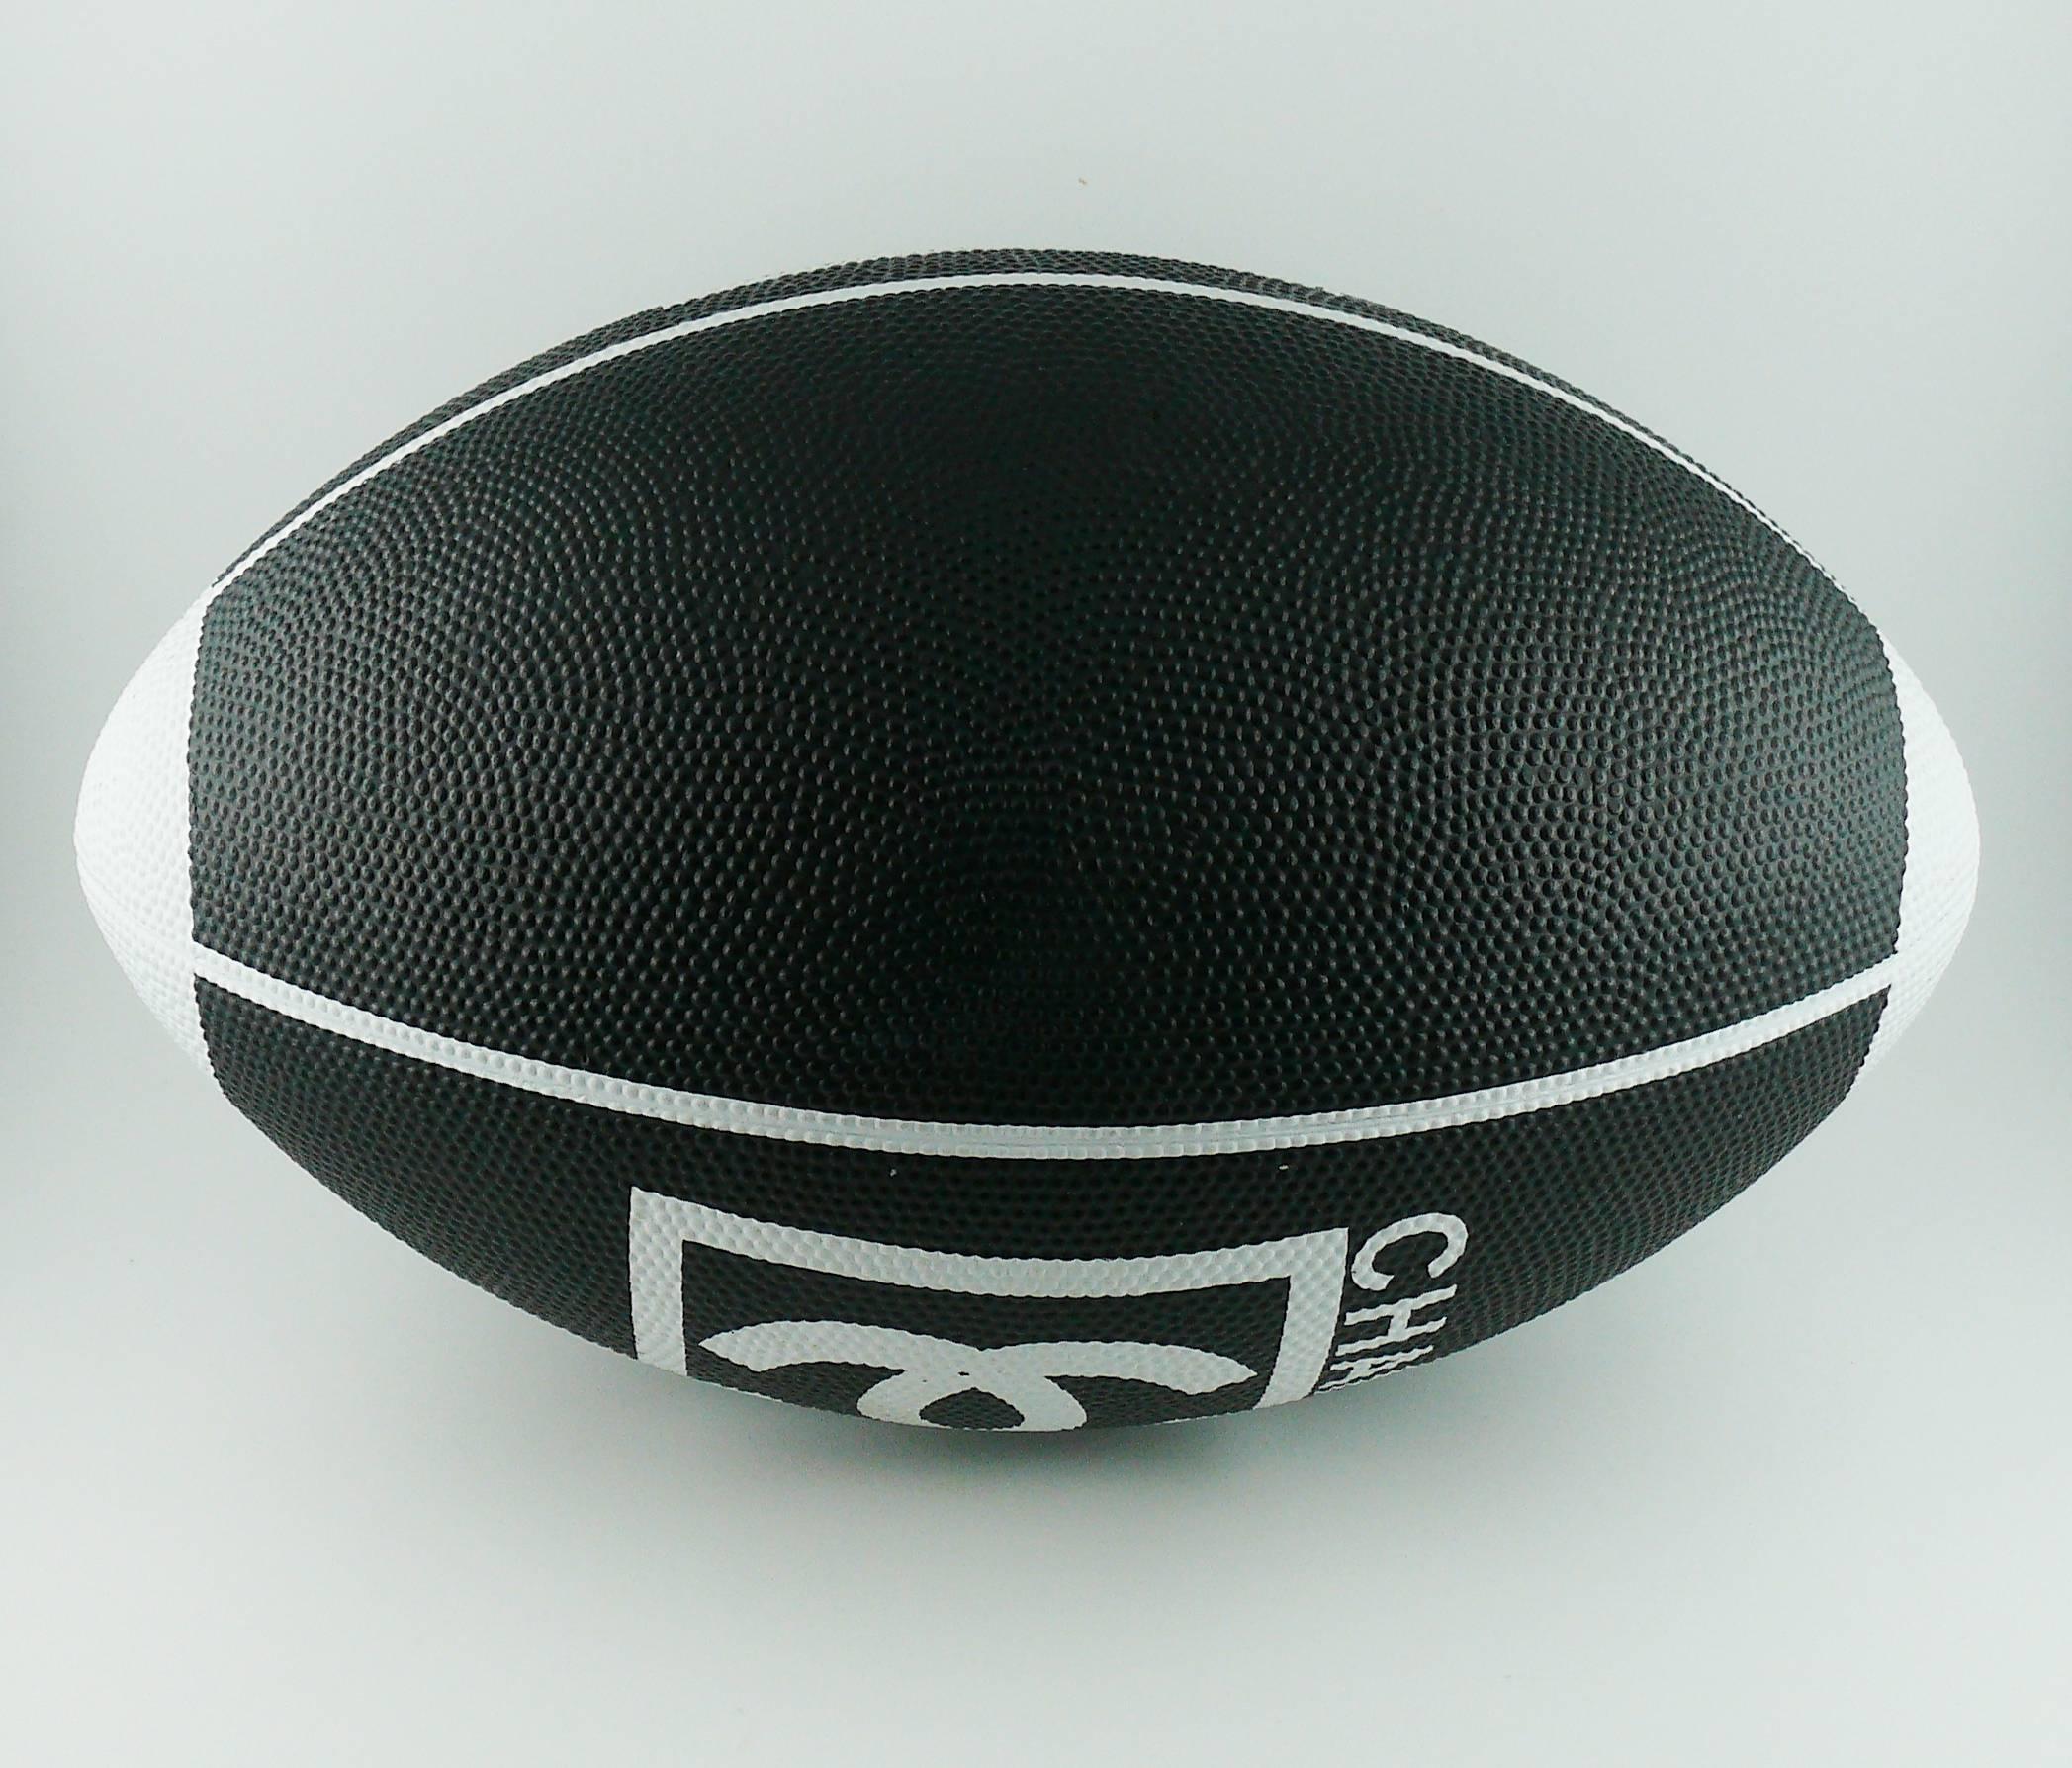 Chanel Rare Collector Limited Edition Rubber Rugby Ball 2007 1